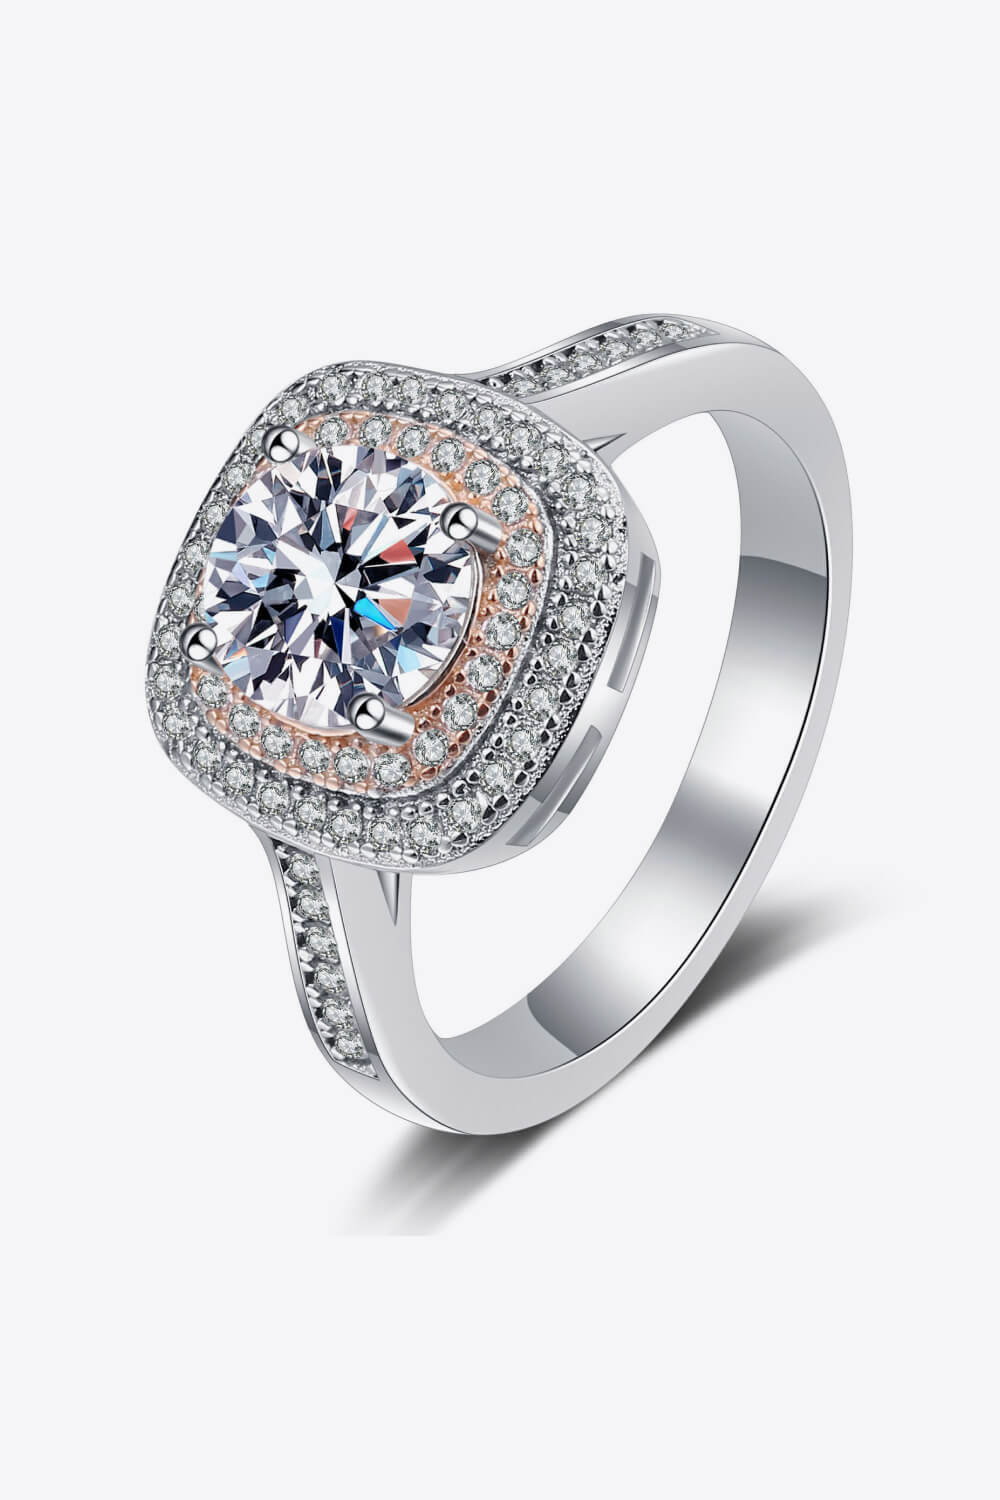 Need You Now Moissanite Ring Jewelry JT's Designer Fashion